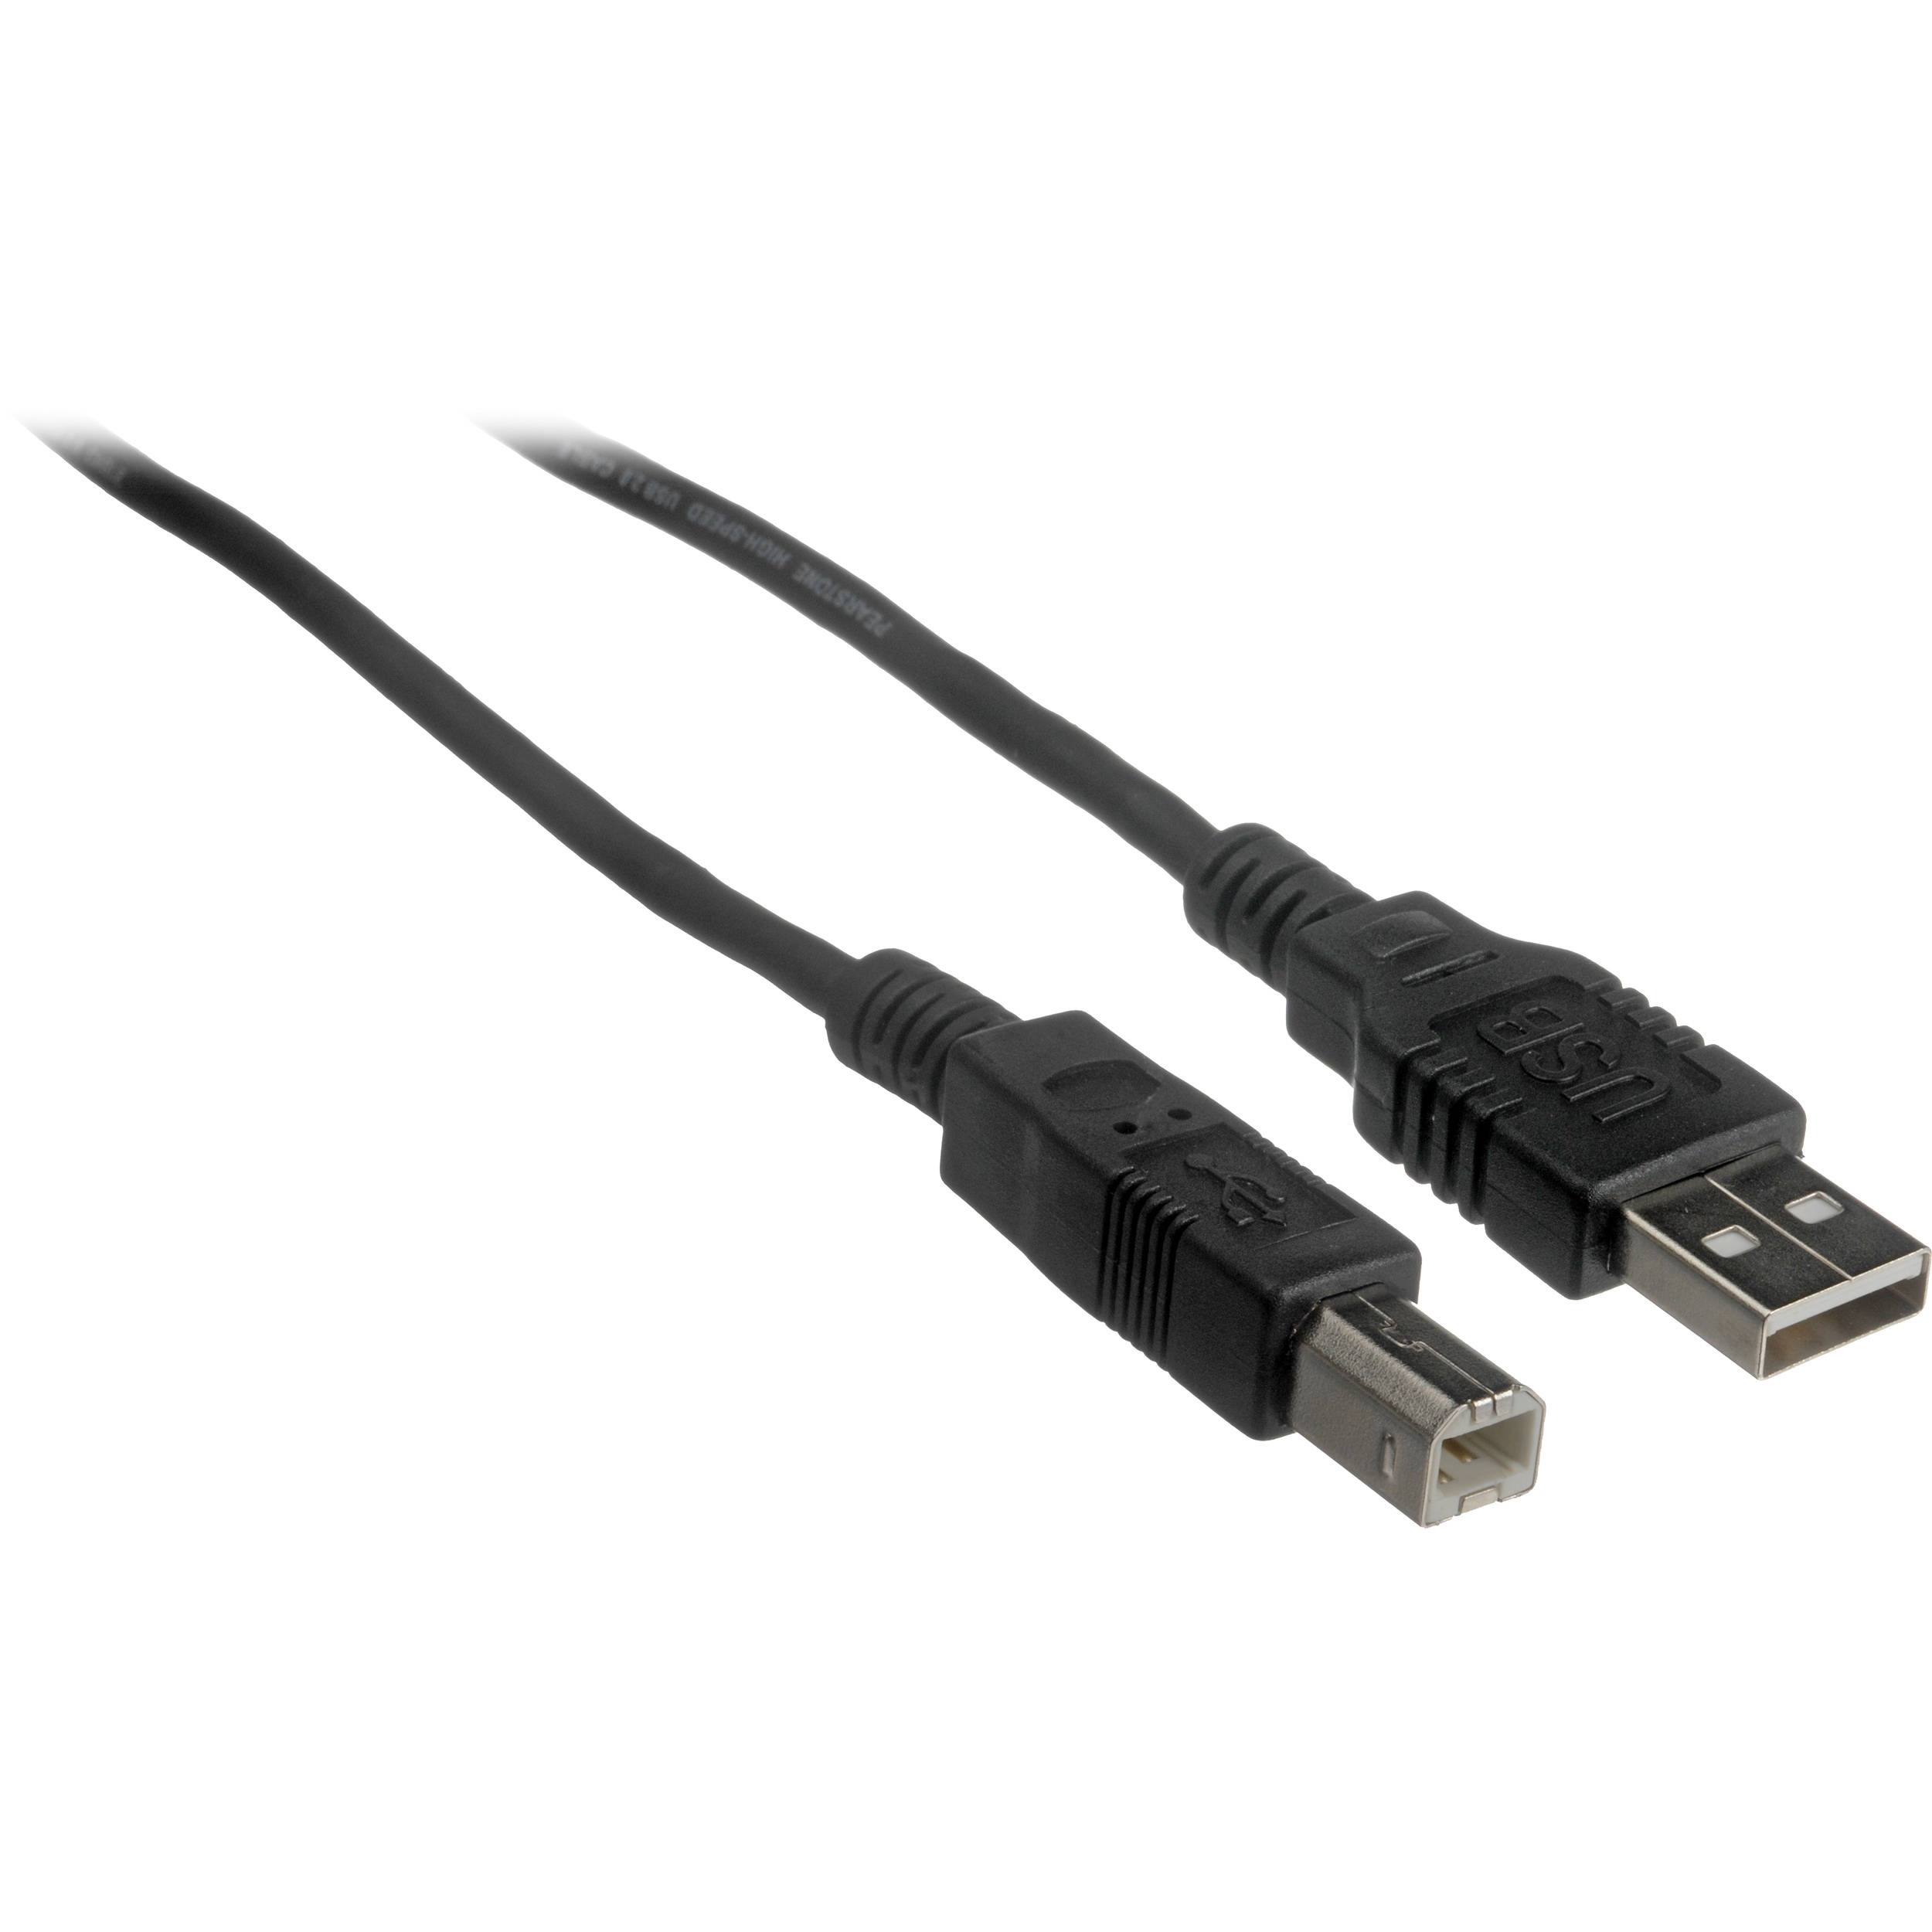 Pearstone USB 2.0 Type A Male to Type B Male Cable - 15' (4.6 m)